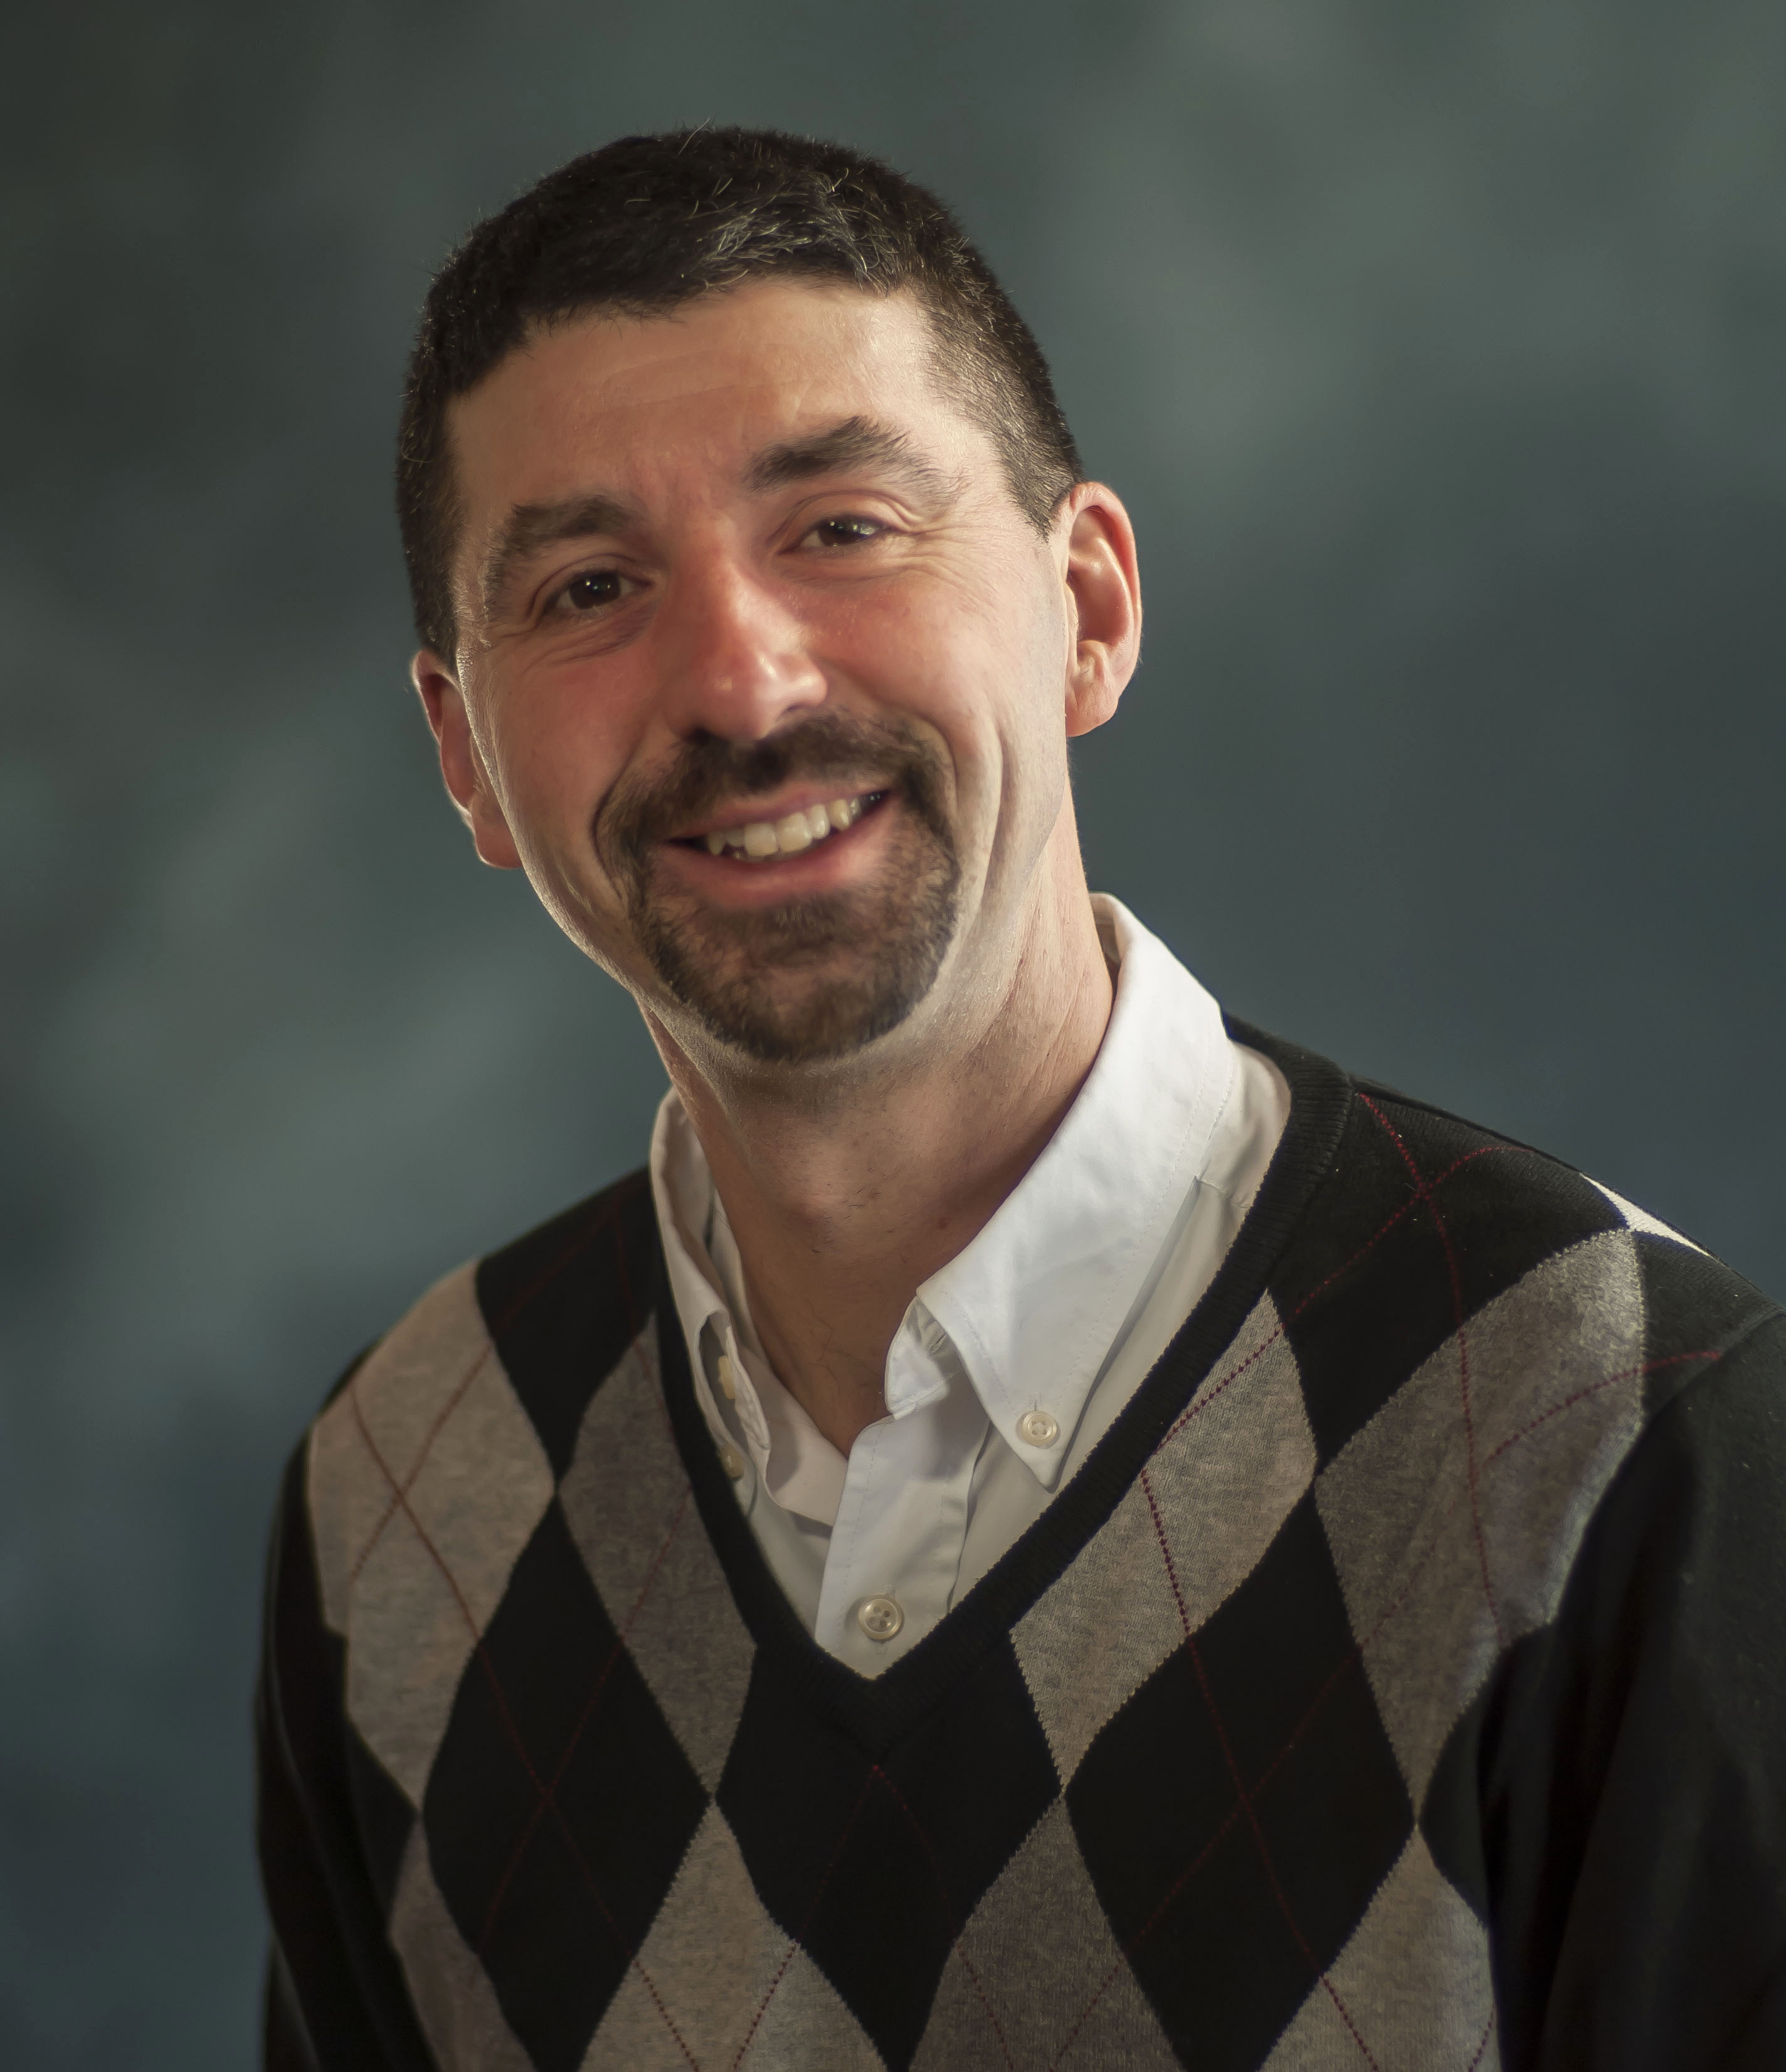 Michael Knupp is assistant professor of information technology at Husson University.